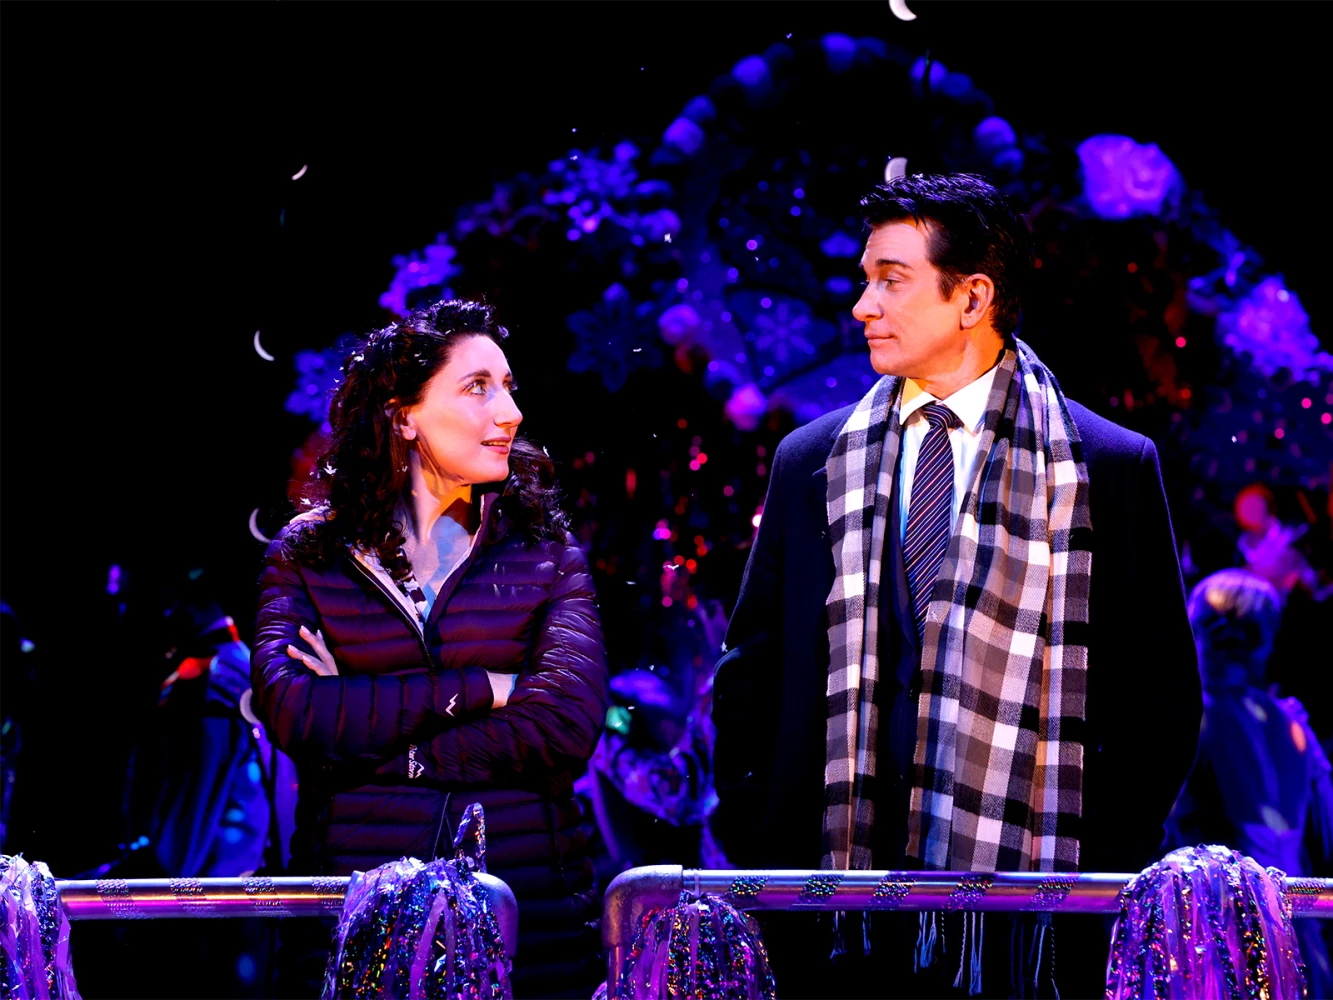 Groundhog Day The Musical: What to expect - 6